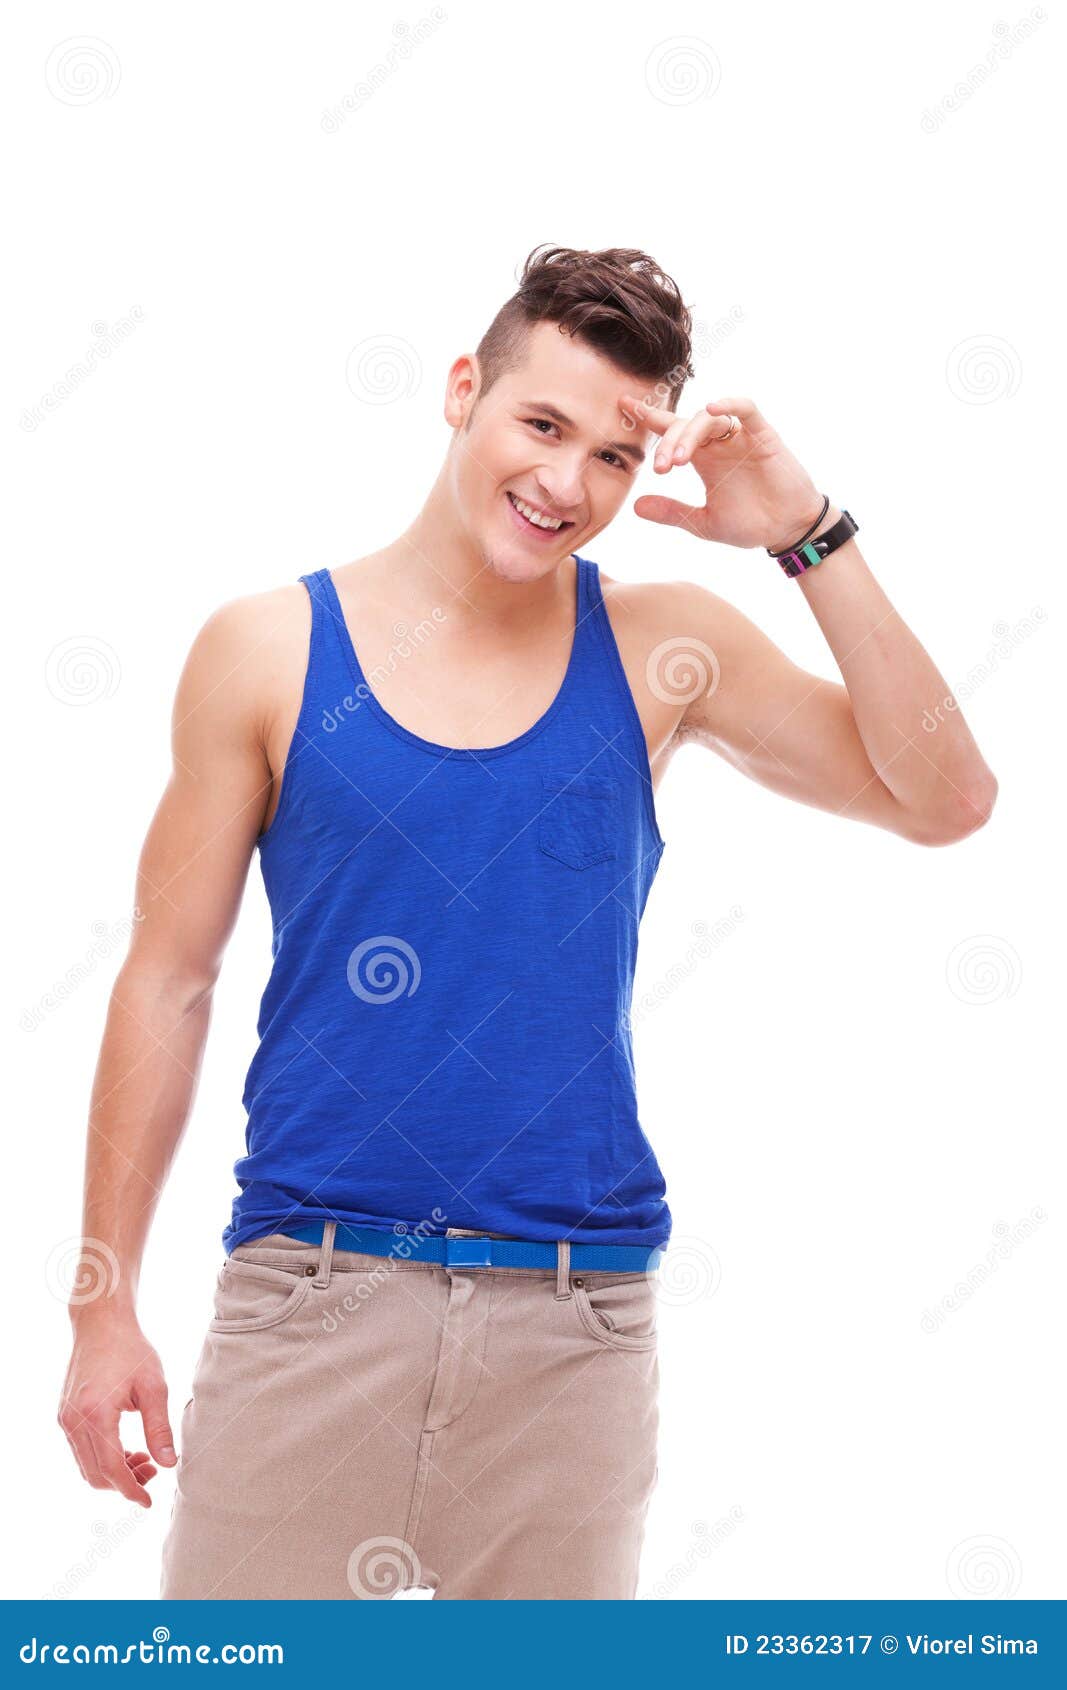 Handsome man looking shy stock image. Image of adult - 23362317